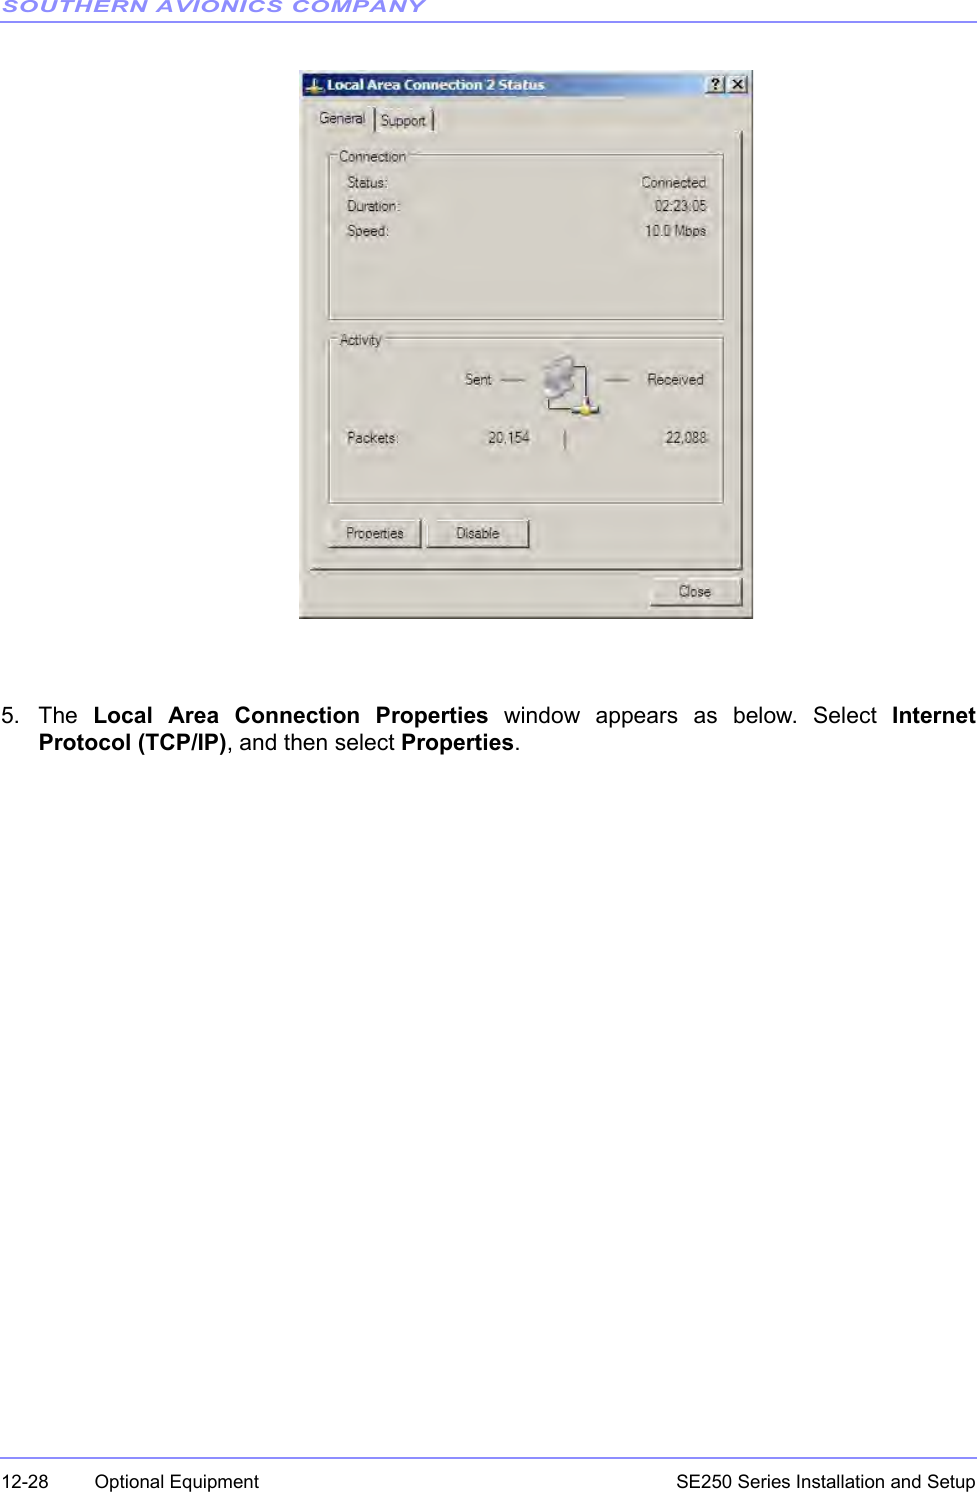 SOUTHERN AVIONICS COMPANYSE250 Series Installation and Setup12-28 Optional Equipment5. The  Local Area Connection Properties window appears as below. Select InternetProtocol (TCP/IP), and then select Properties.